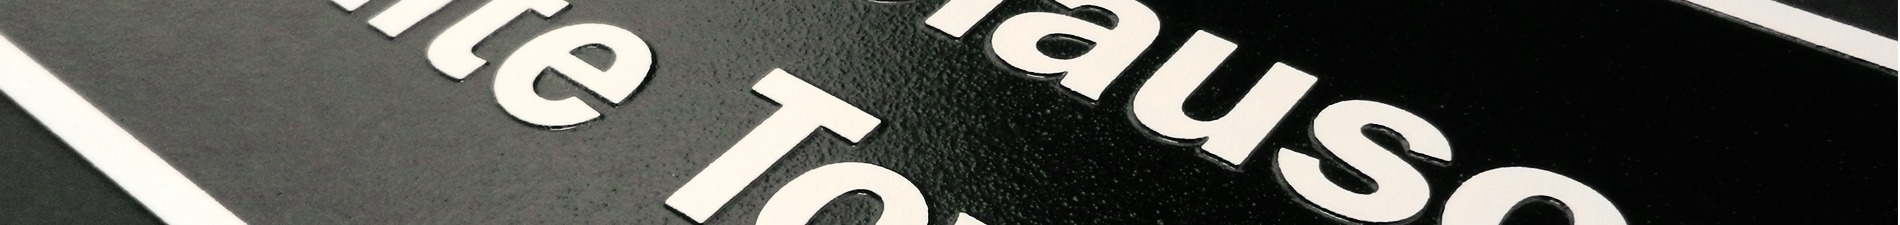 Header image closeup of Knoxville Raceway architectural signage